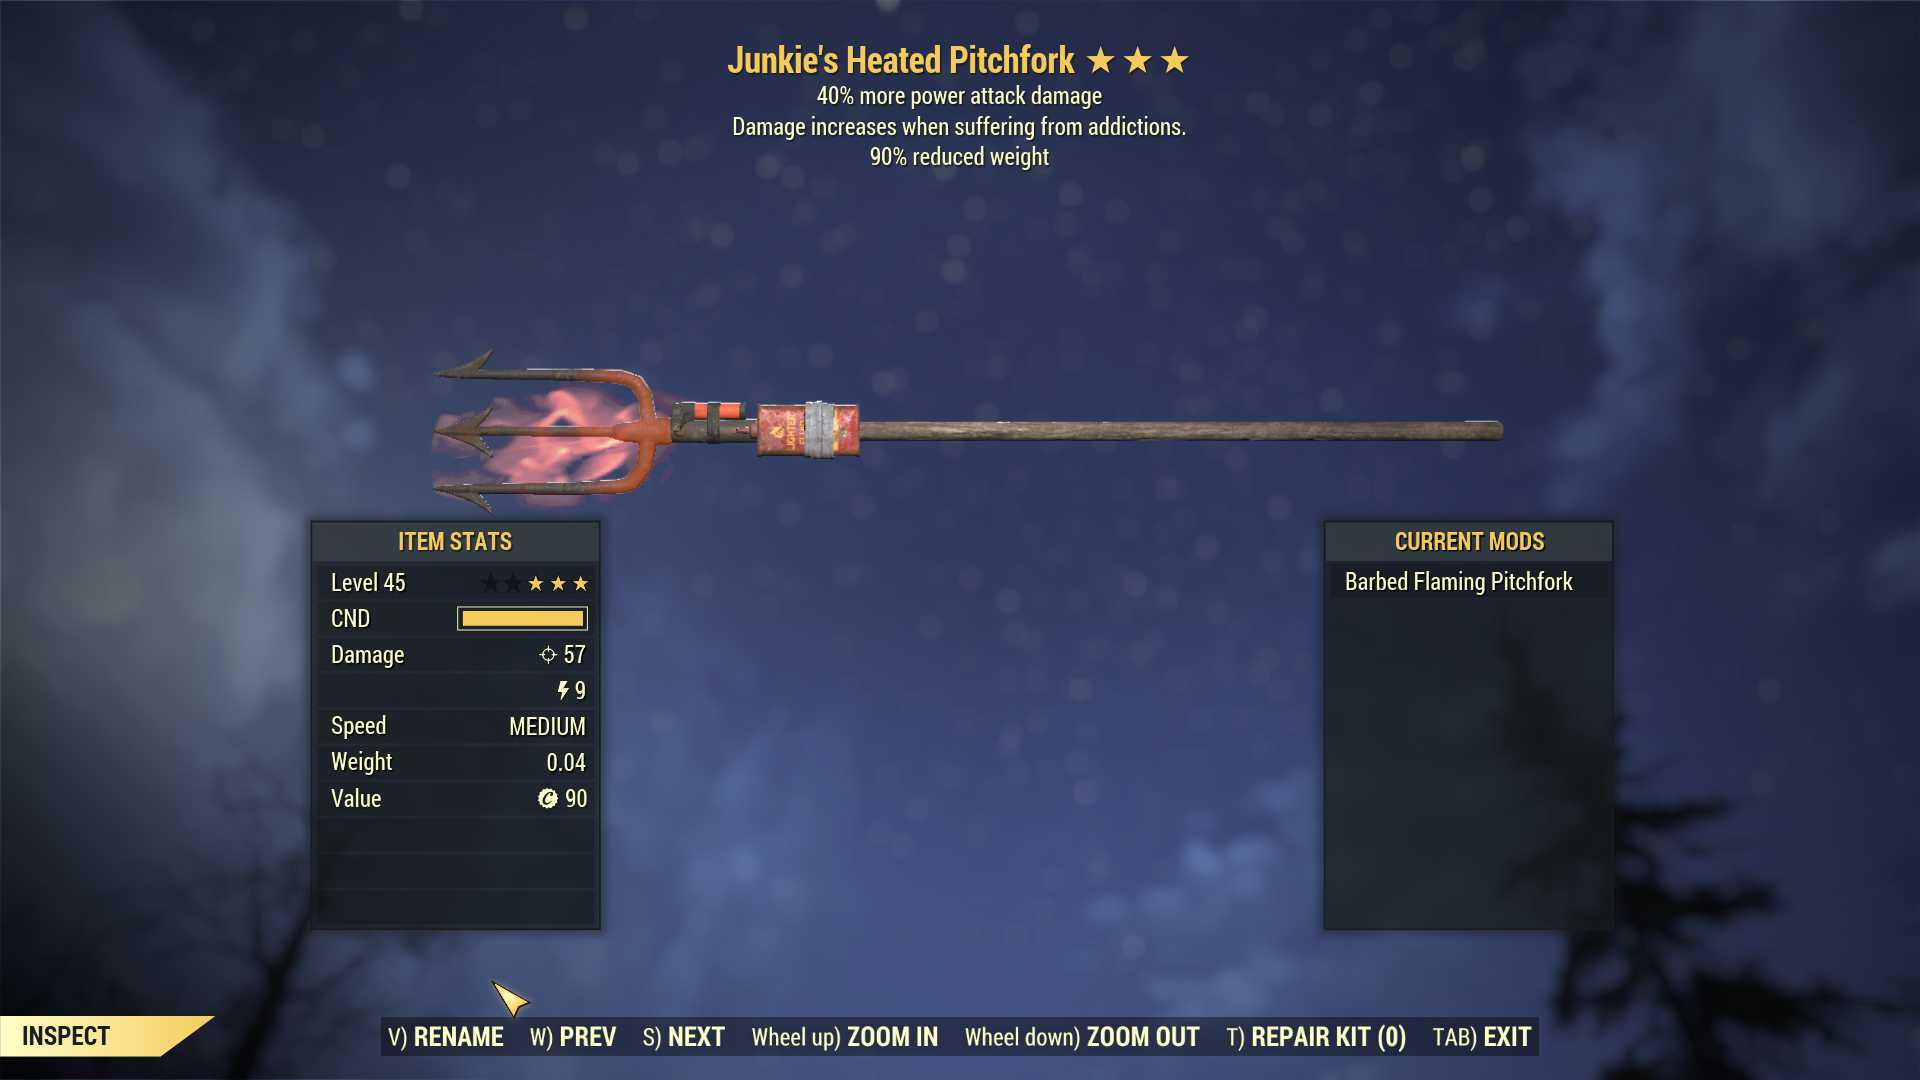 Junkie's Pitchfork (+40% damage PA, 90% reduced weight)